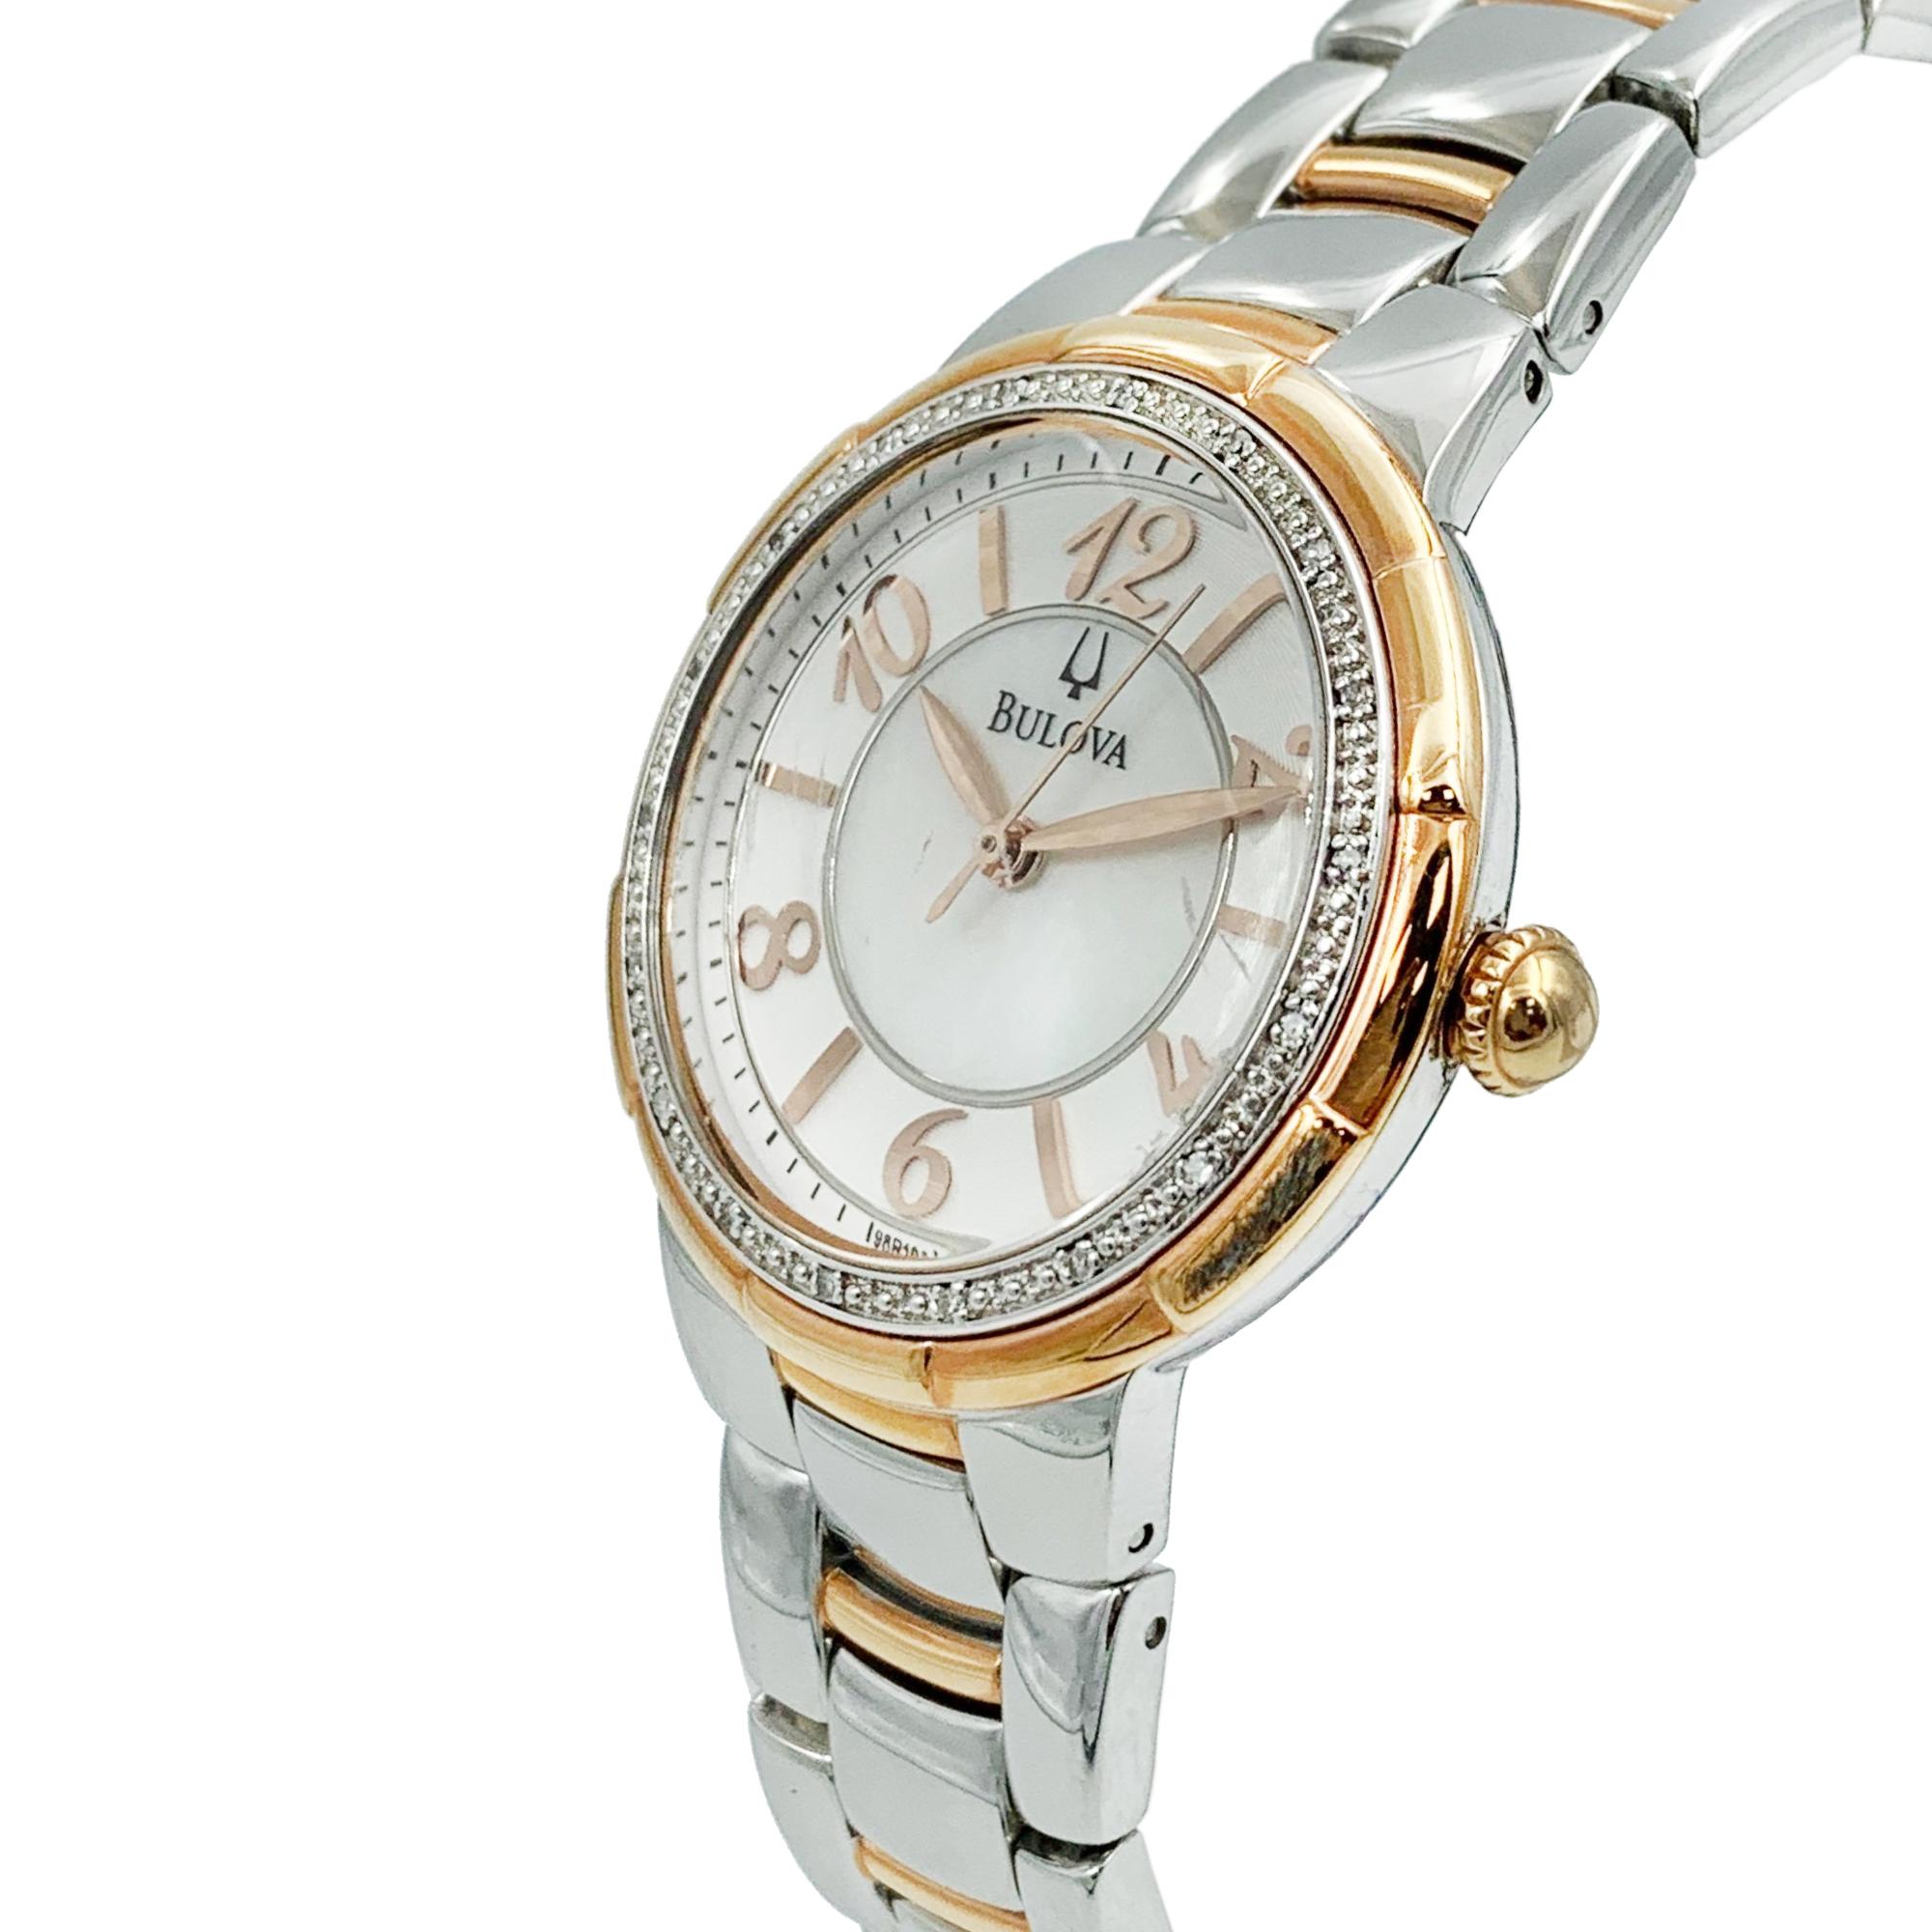 Pre-owed Bulova Diamond Bezel Stainless Steel Quartz Womens Watch 98R162. Watch has visible Discoloration and Scratches on Bezel and Bracelet From Handling. This Timepiece is Powered by a Quartz Movement and Features: Stainless Steel Case with a